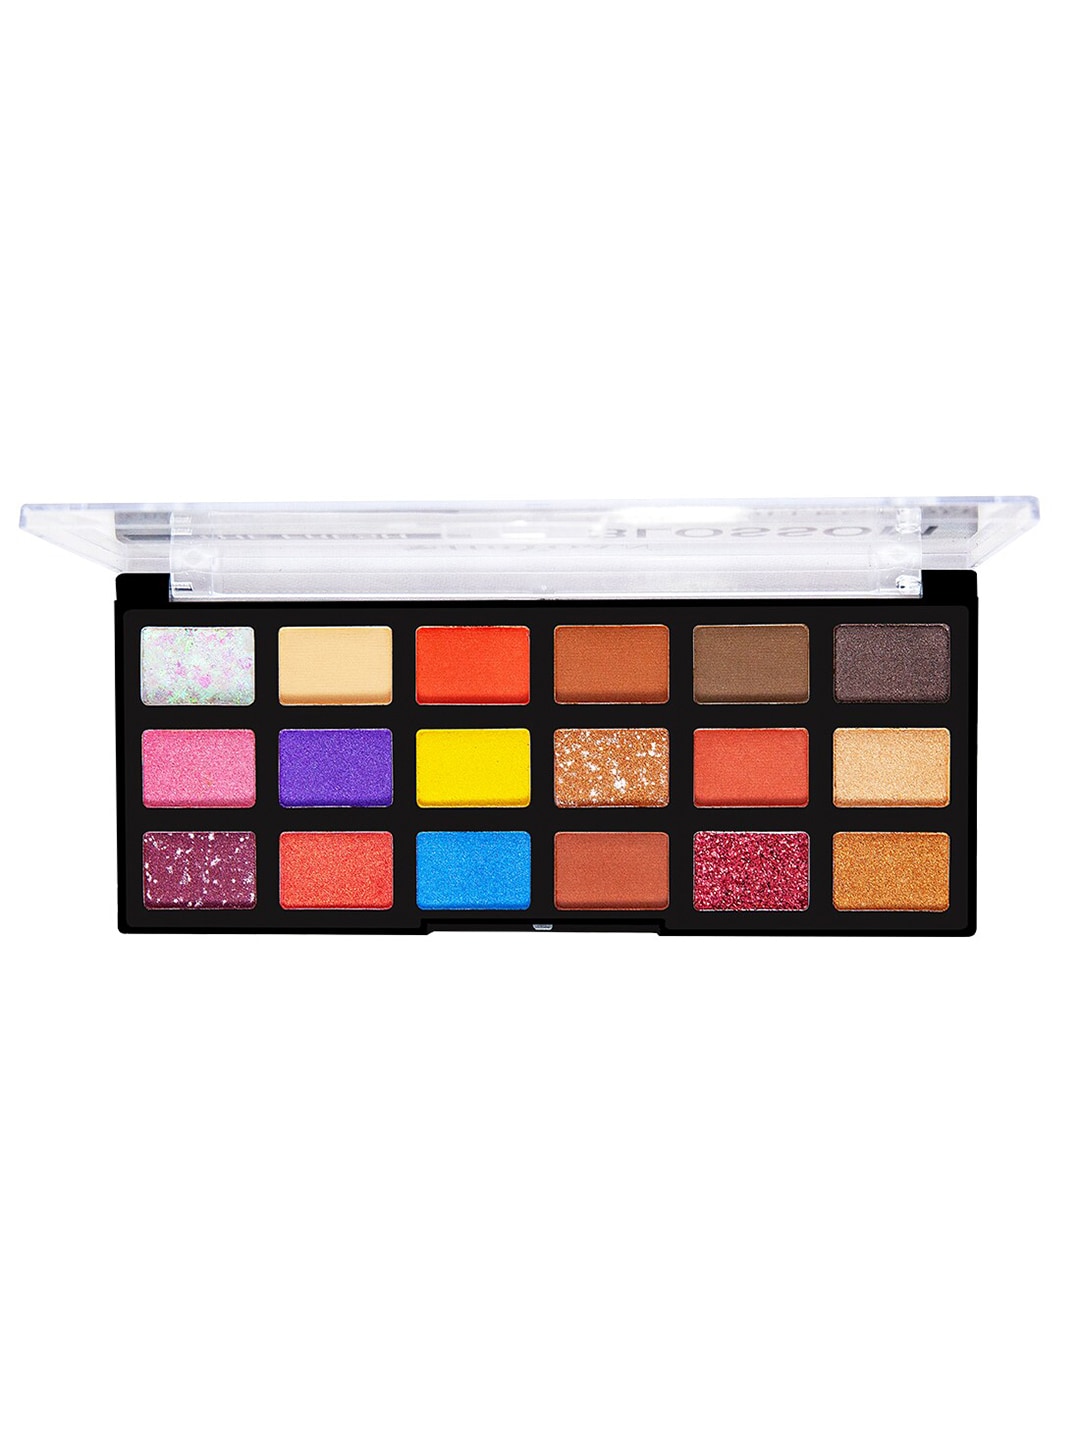 SHRYOAN Women's The Fresh Blossom Eyeshadow Palette Price in India